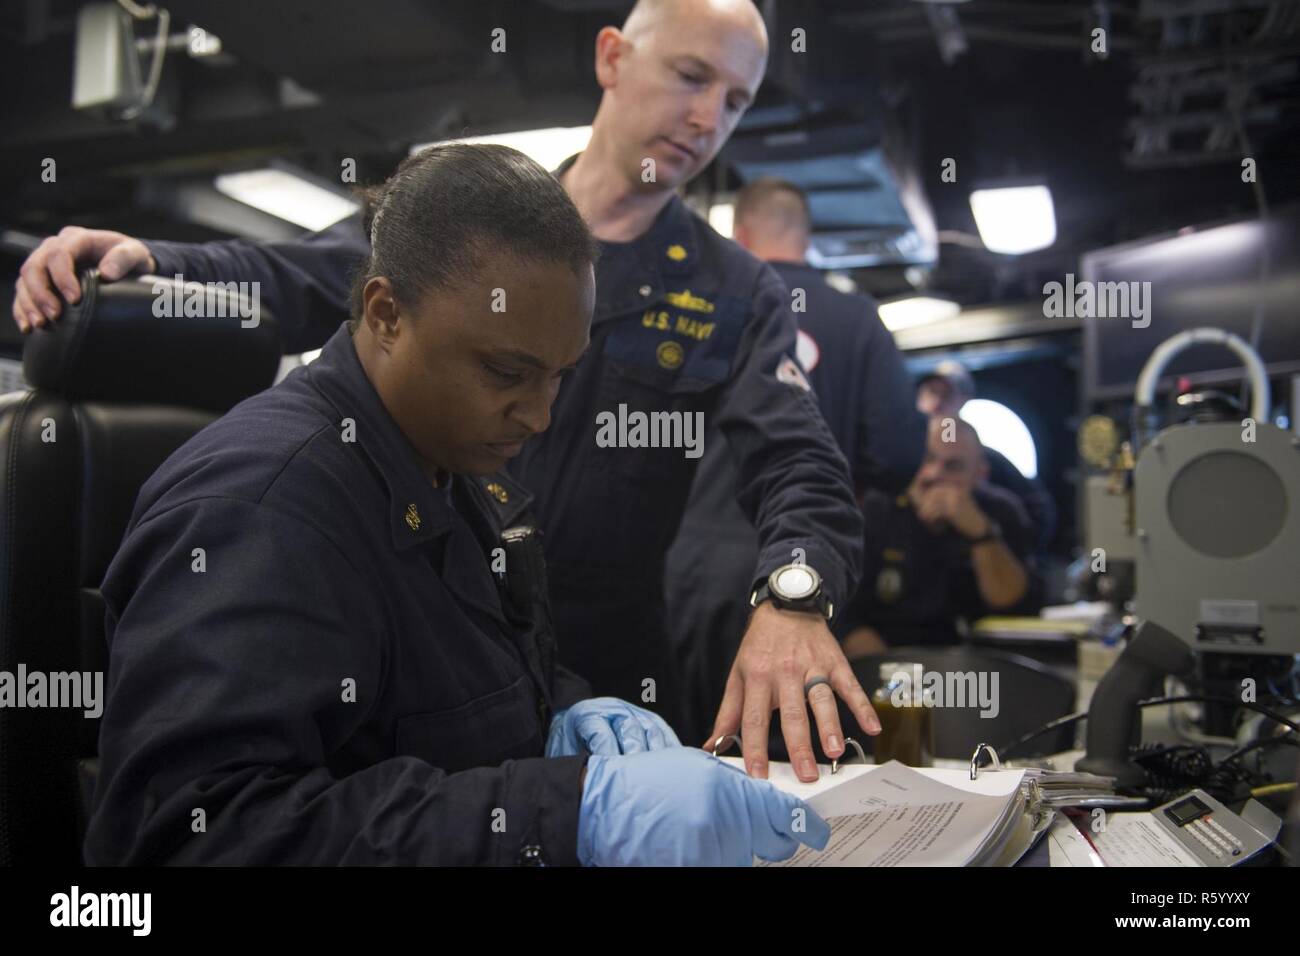 CHANGI NAVAL BASE, Singapore (April 24, 2017) Chief Engineman Tramaine Londo evaluates lube oil on the bridge during an assessment with Engineering Assessments Pacific as part of Engineering Operations Certification aboard littoral combat ship USS Coronado (LCS 4). Coronado is on a rotational deployment in U.S. 7th Fleet area of responsibility, patrolling the region's littorals and working hull-to-hull with partner navies to provide 7th Fleet with the flexible capabilities it needs now and in the future. Stock Photo